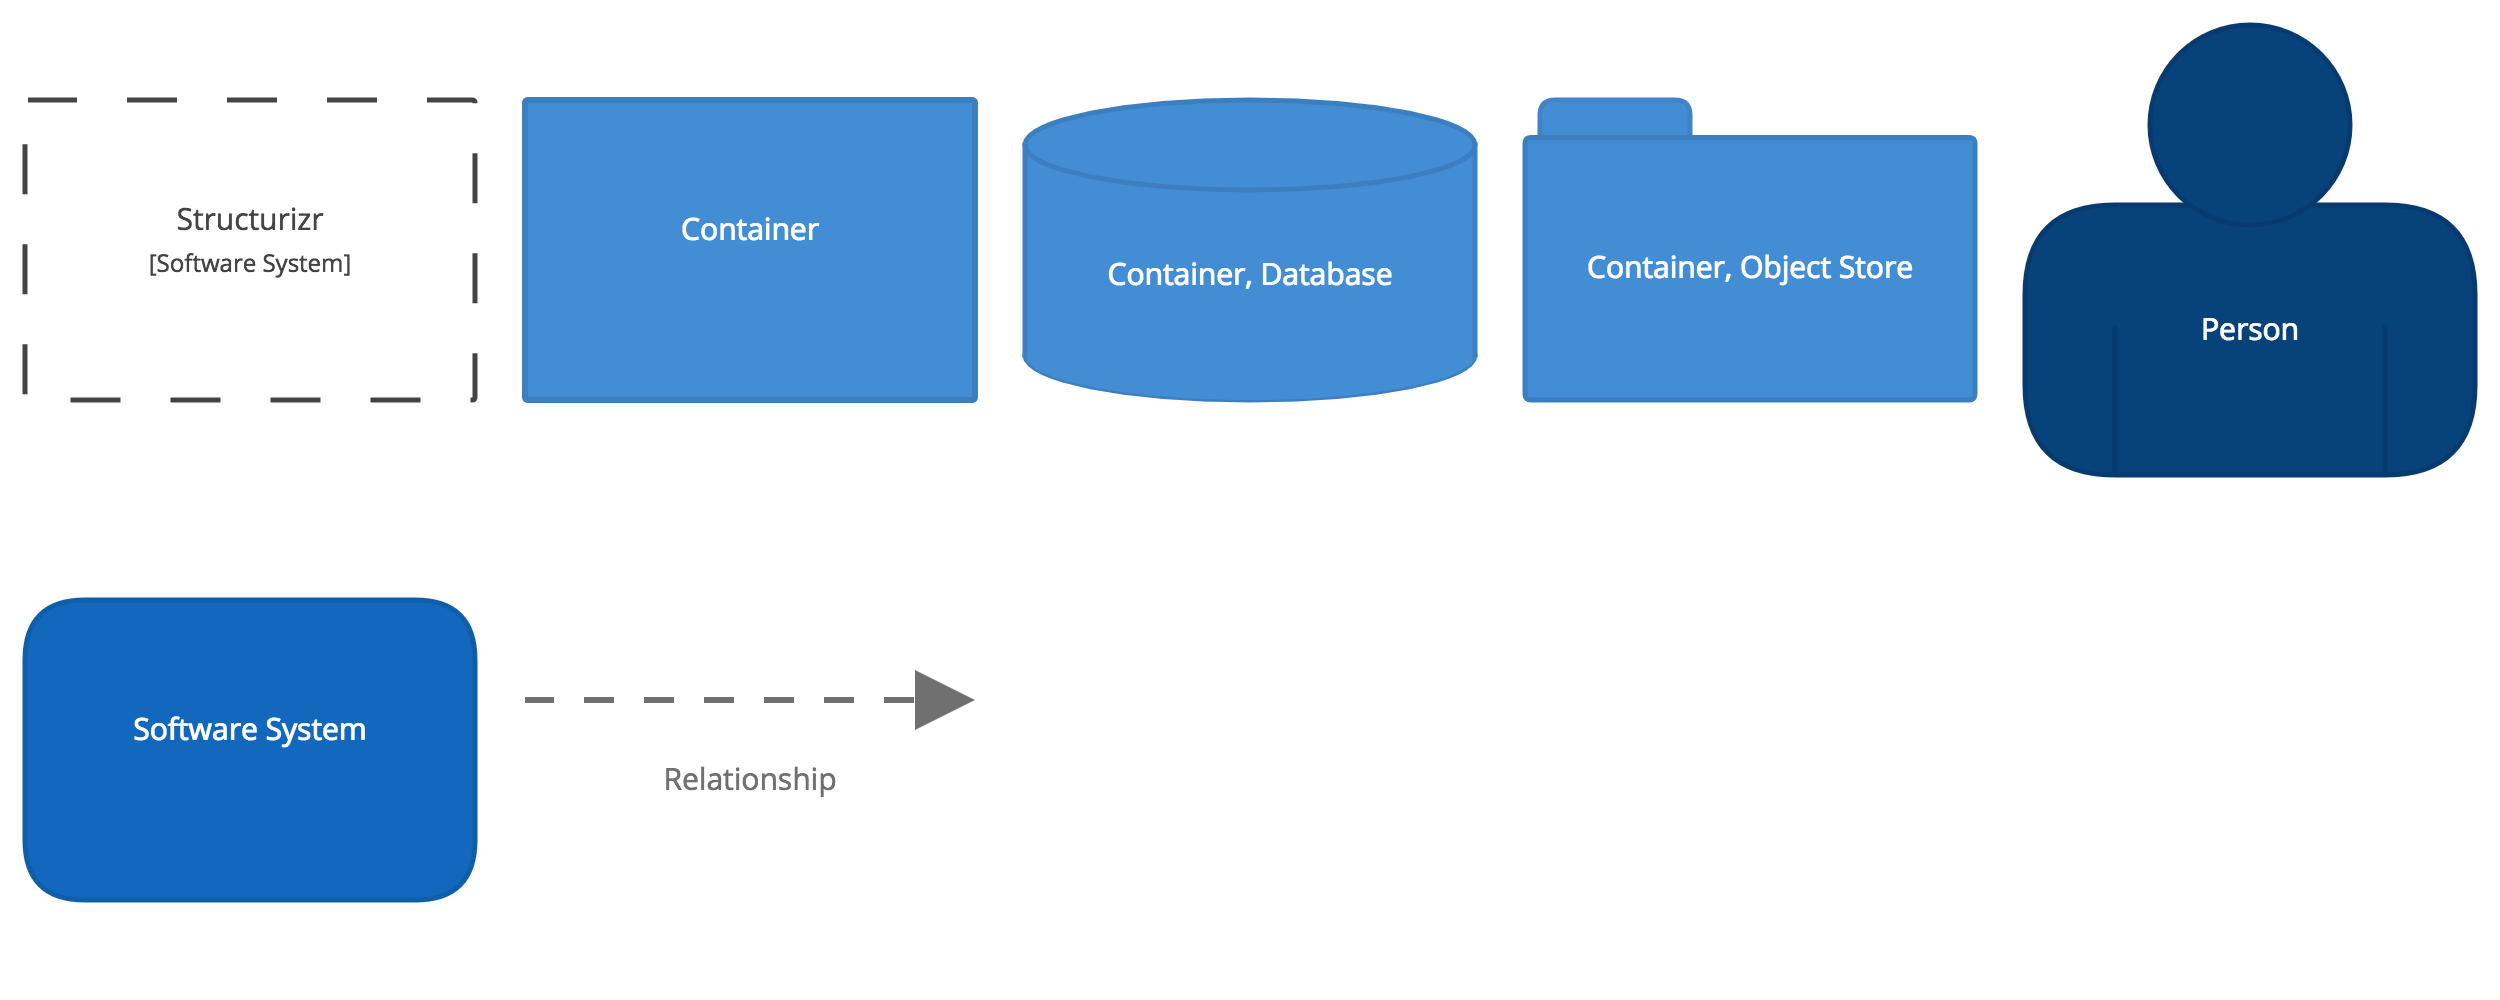 structurizr - containers - diagram key